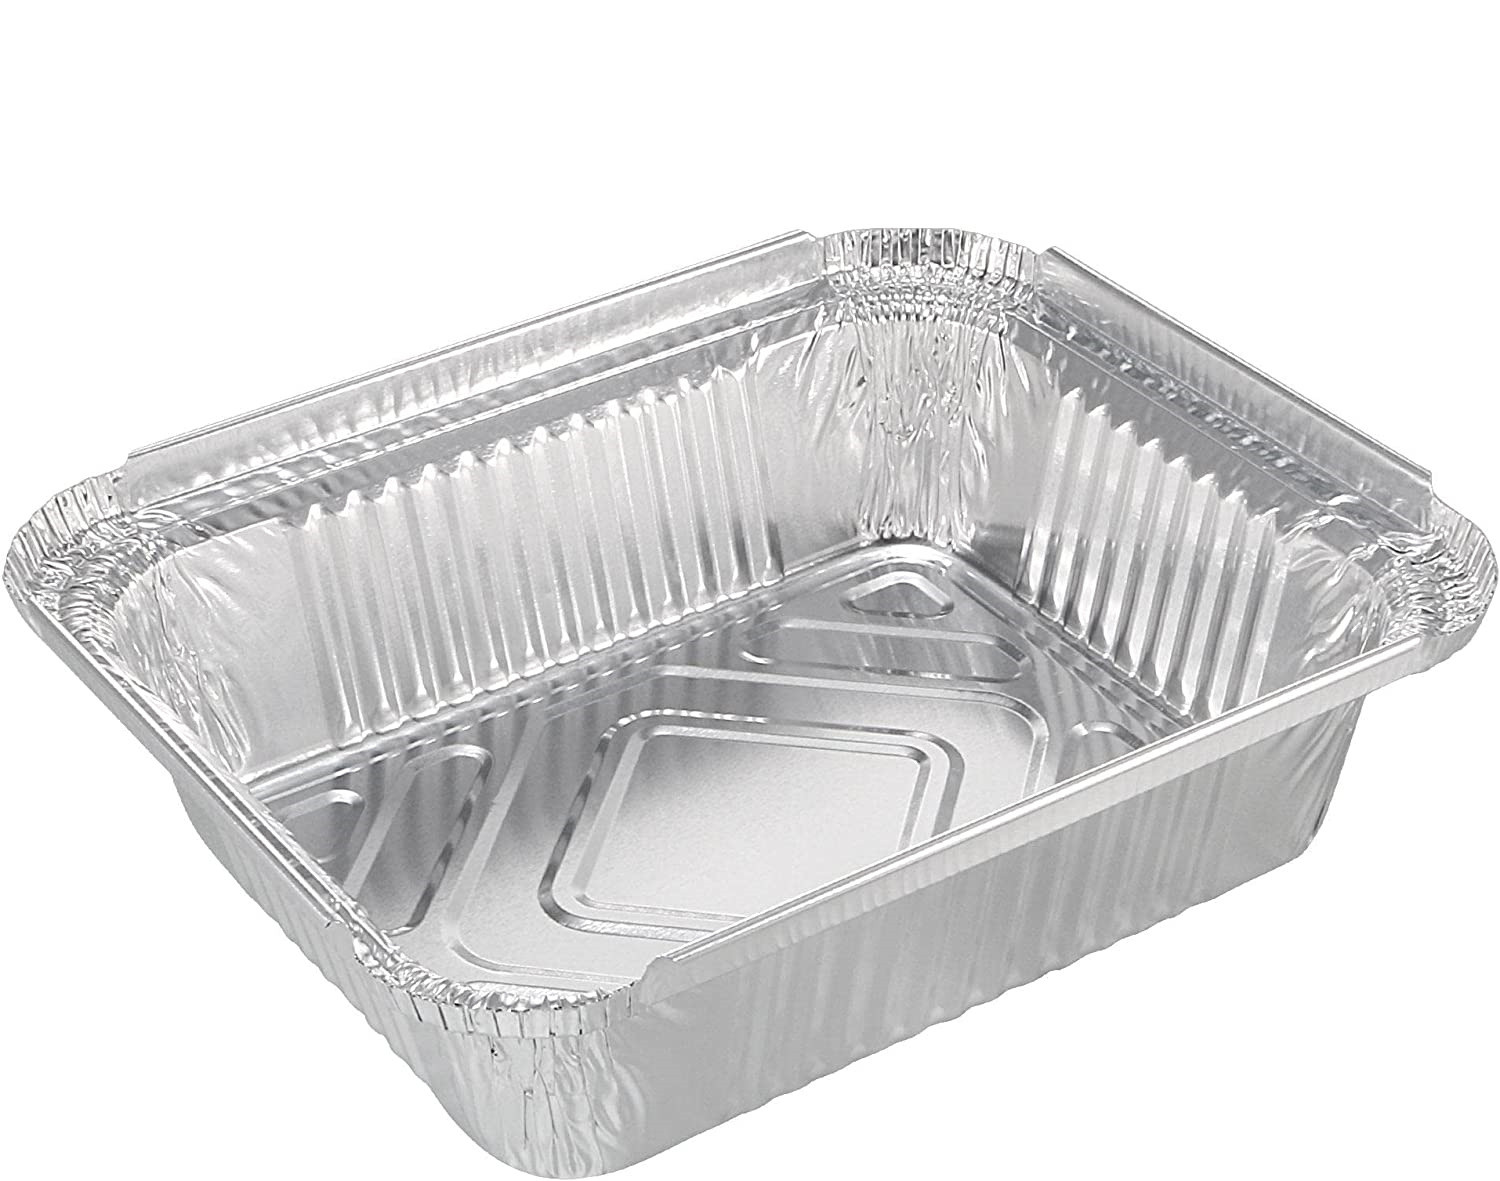 [50 Pack - 8” x 8”] Square Baking Cake Pans| Heavy Duty L Disposable Aluminum Foil Tins L Portable Food Containers L Perfect for Roasting Toaster